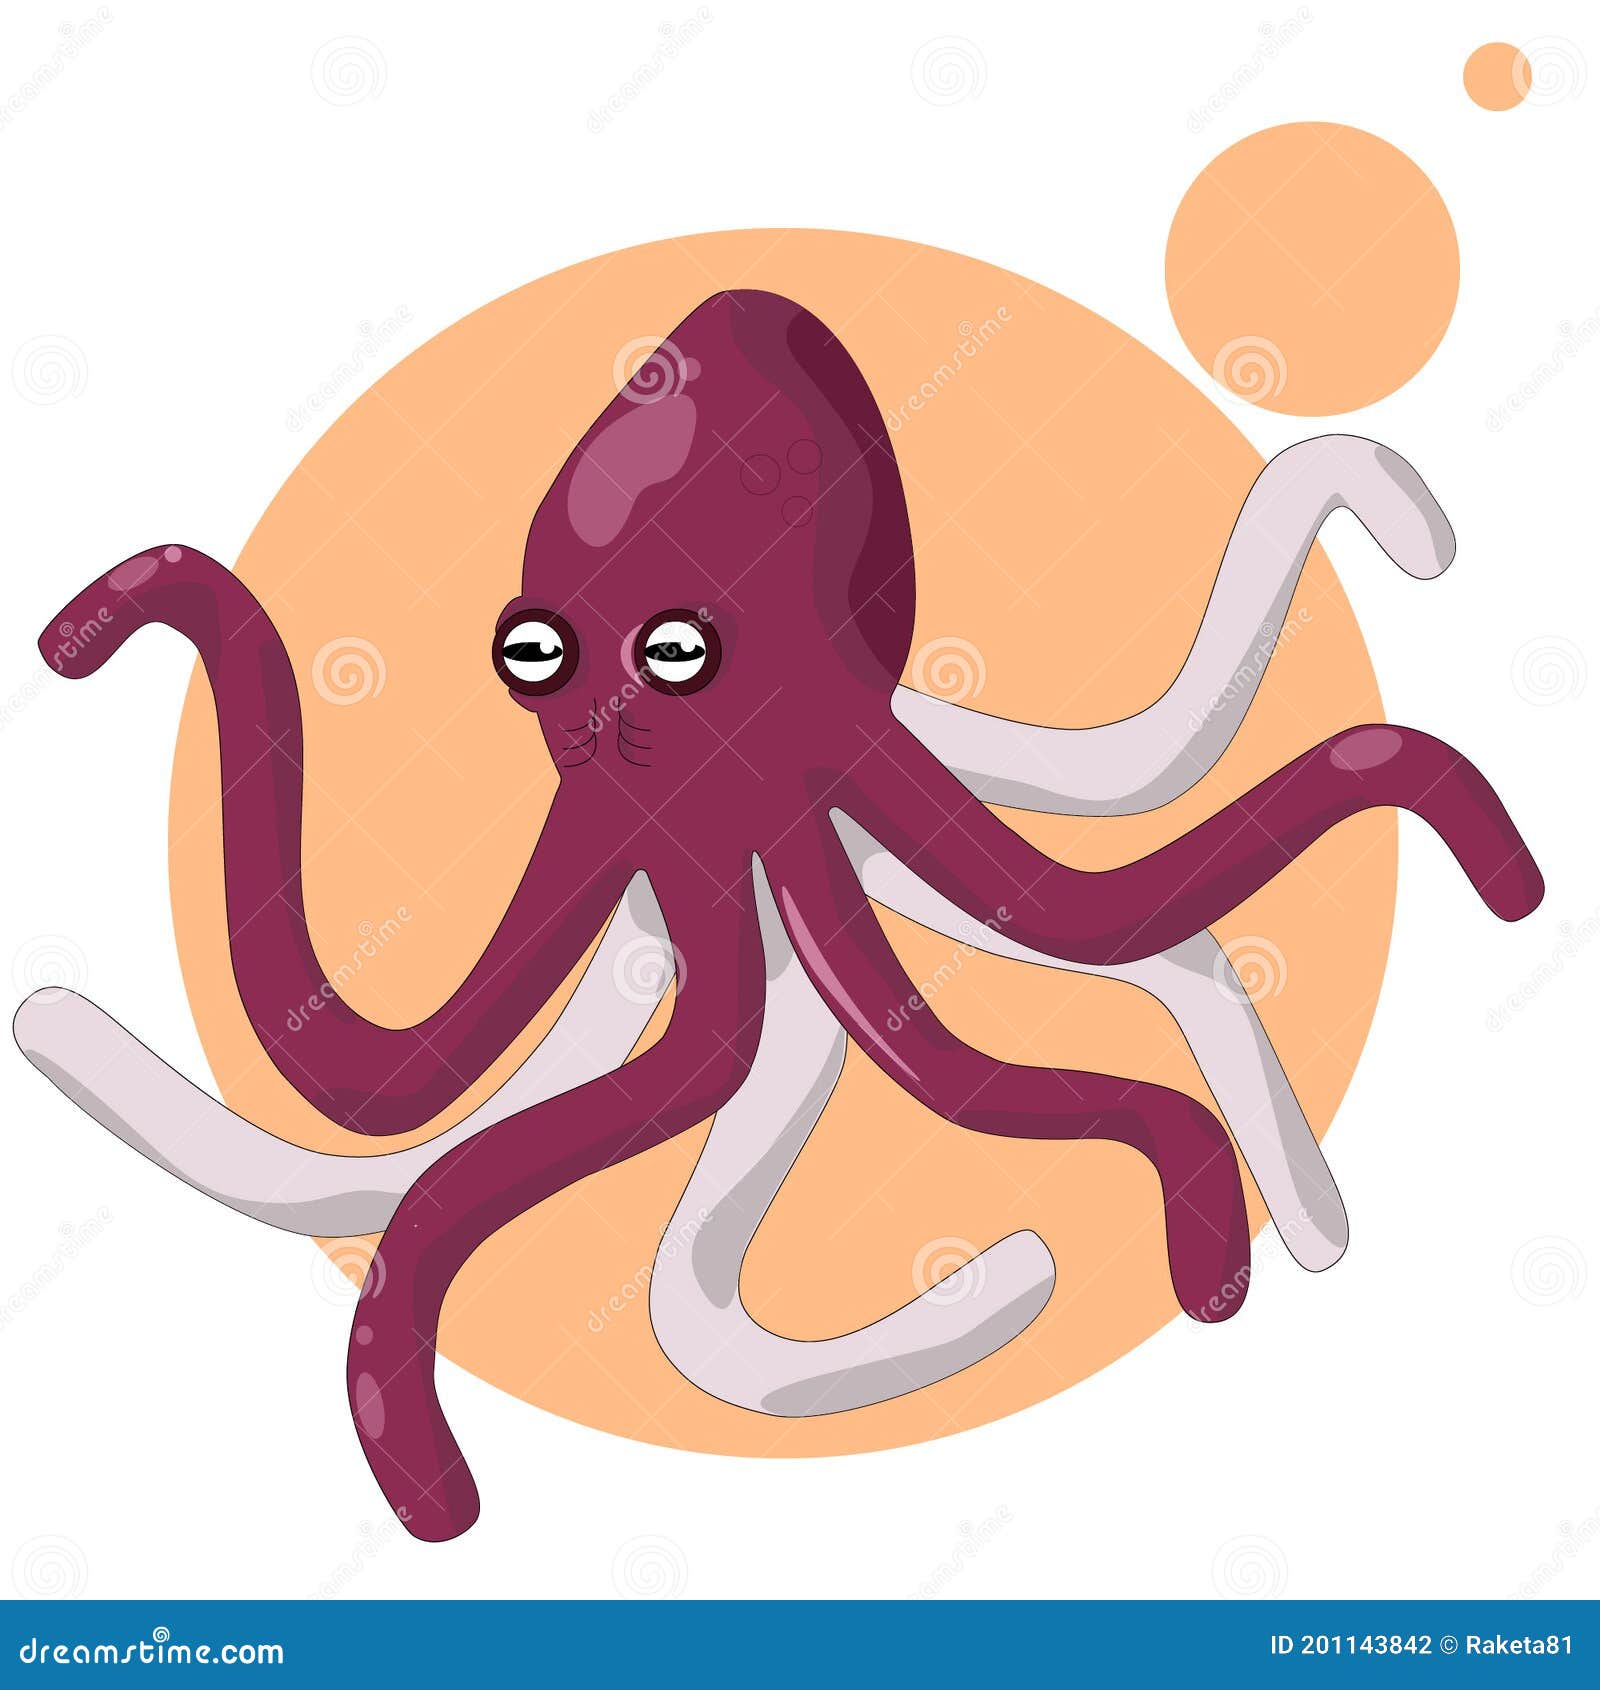 Purple Molusk with Tentacles and Big Head, Red Squid, Cartoon Octopus for  Eating Stock Illustration - Illustration of advertising, cartoon: 201143842